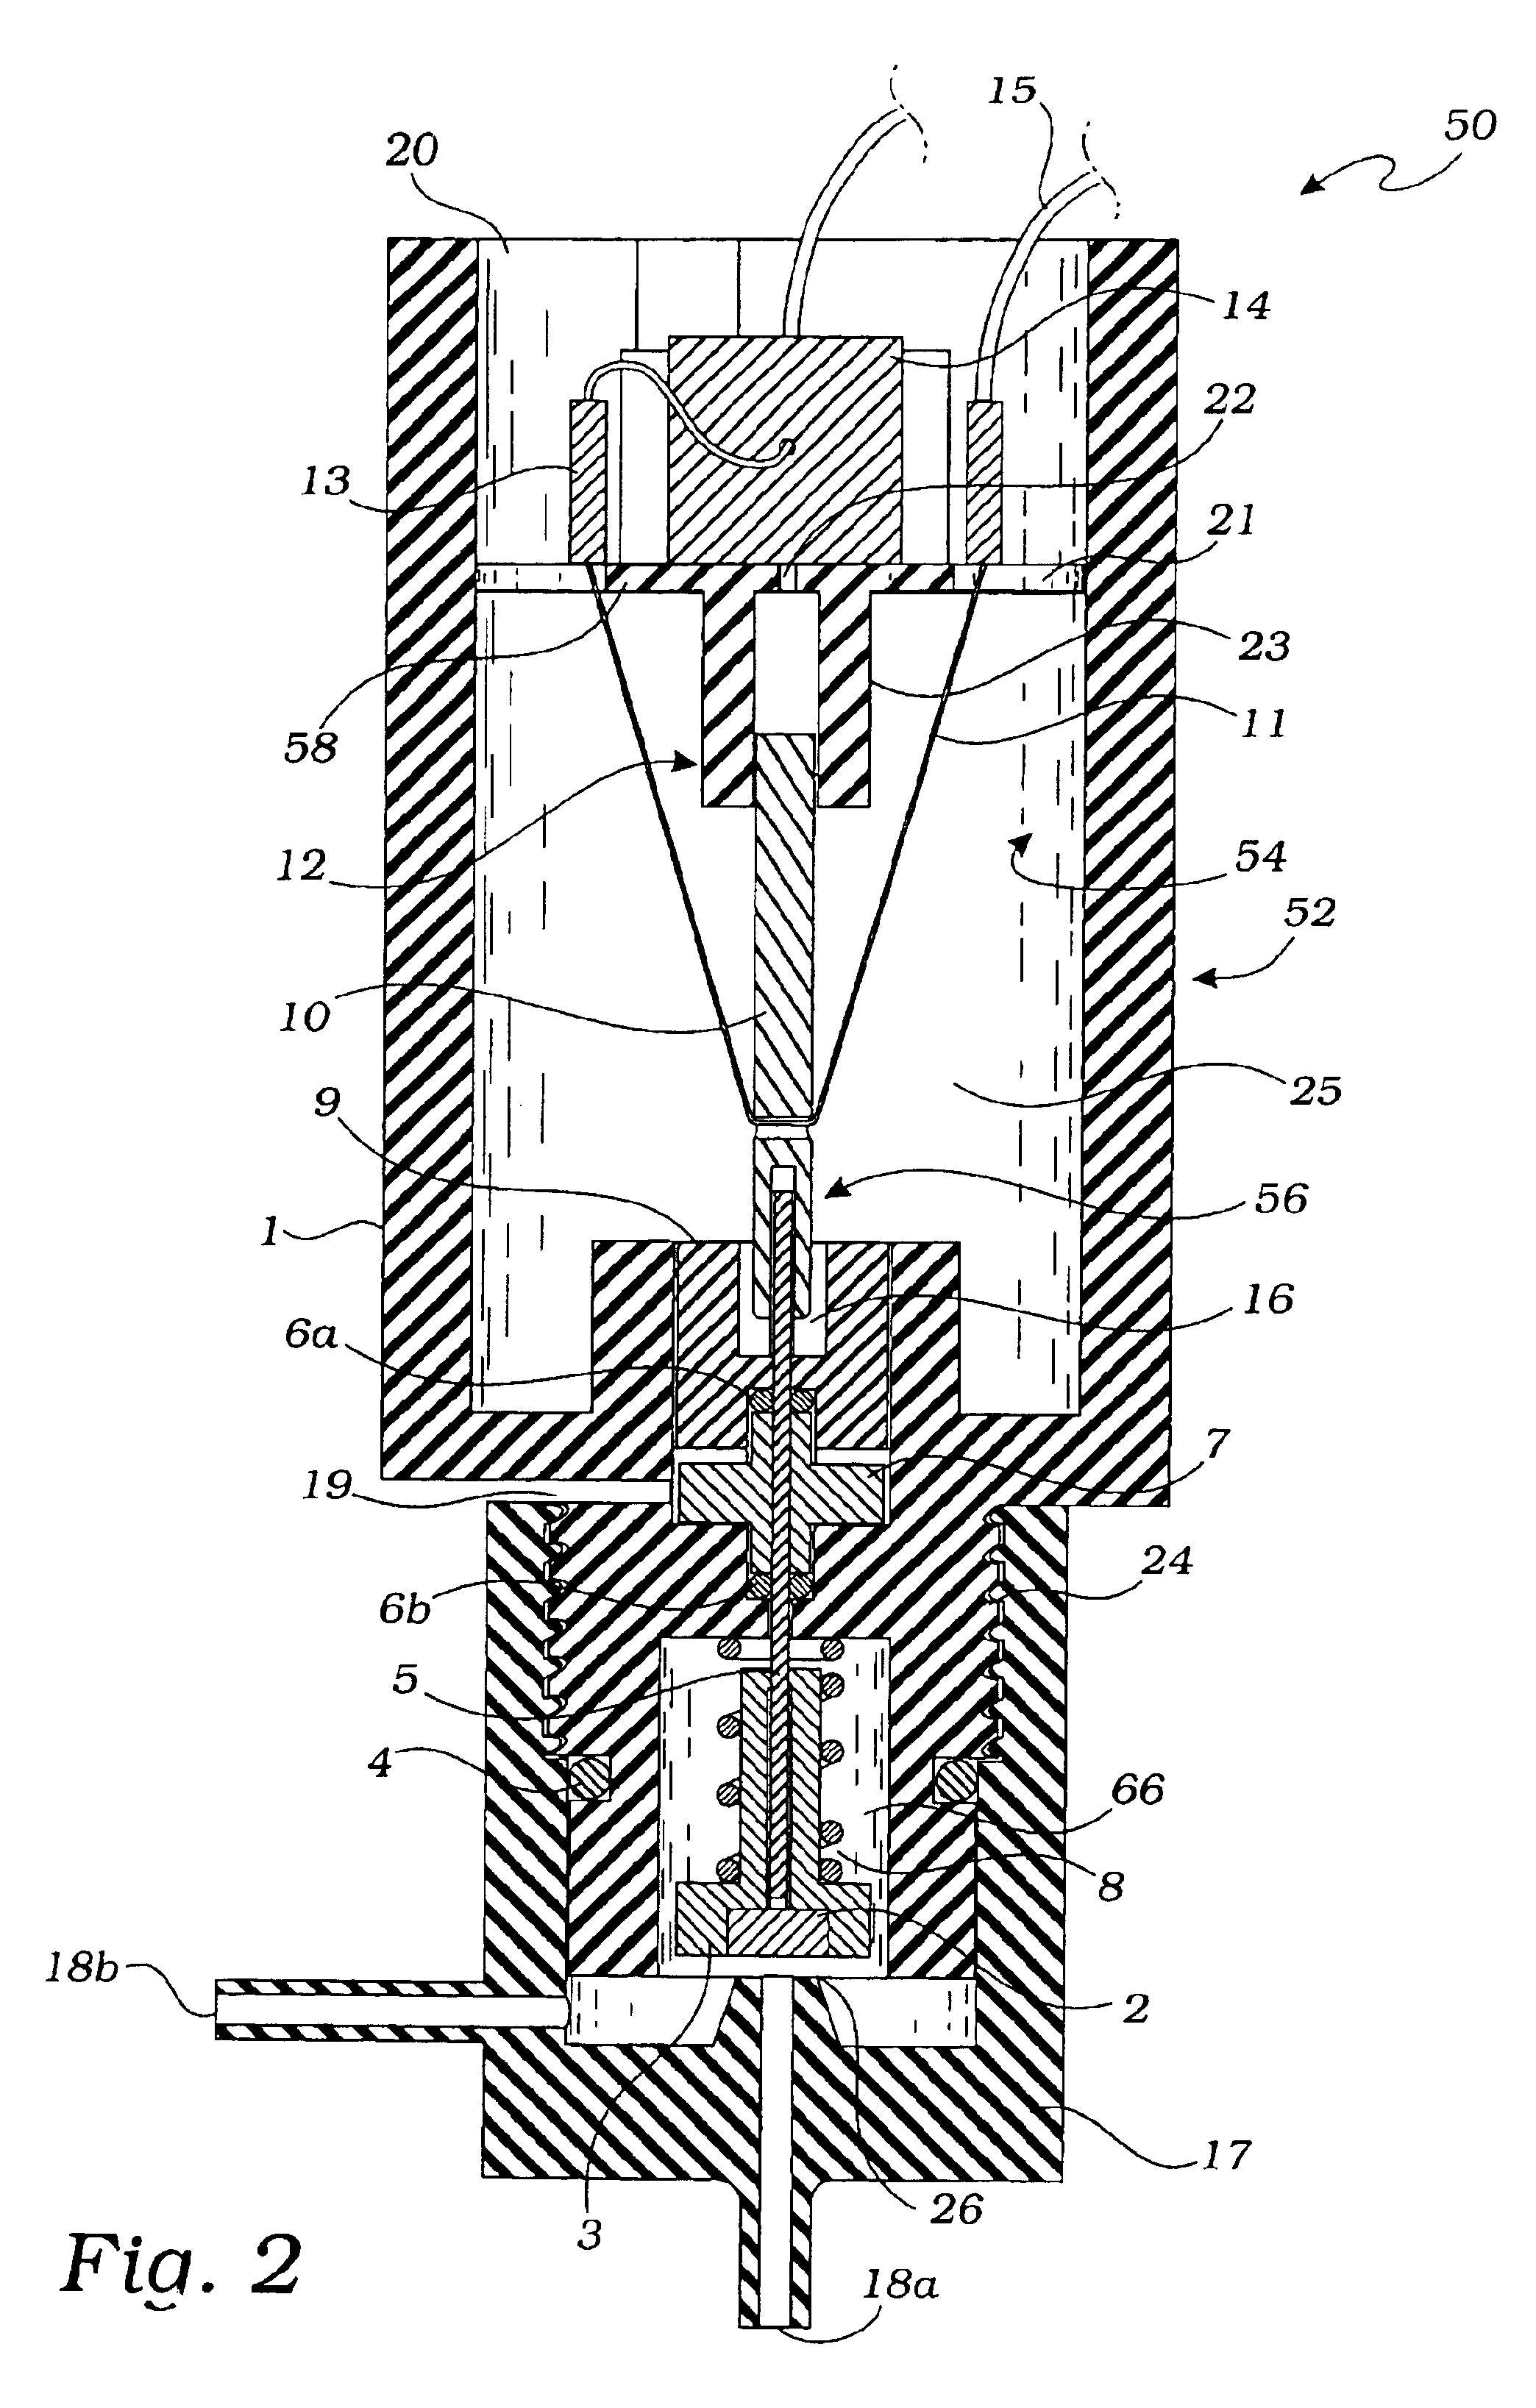 Memory wire actuated control valve